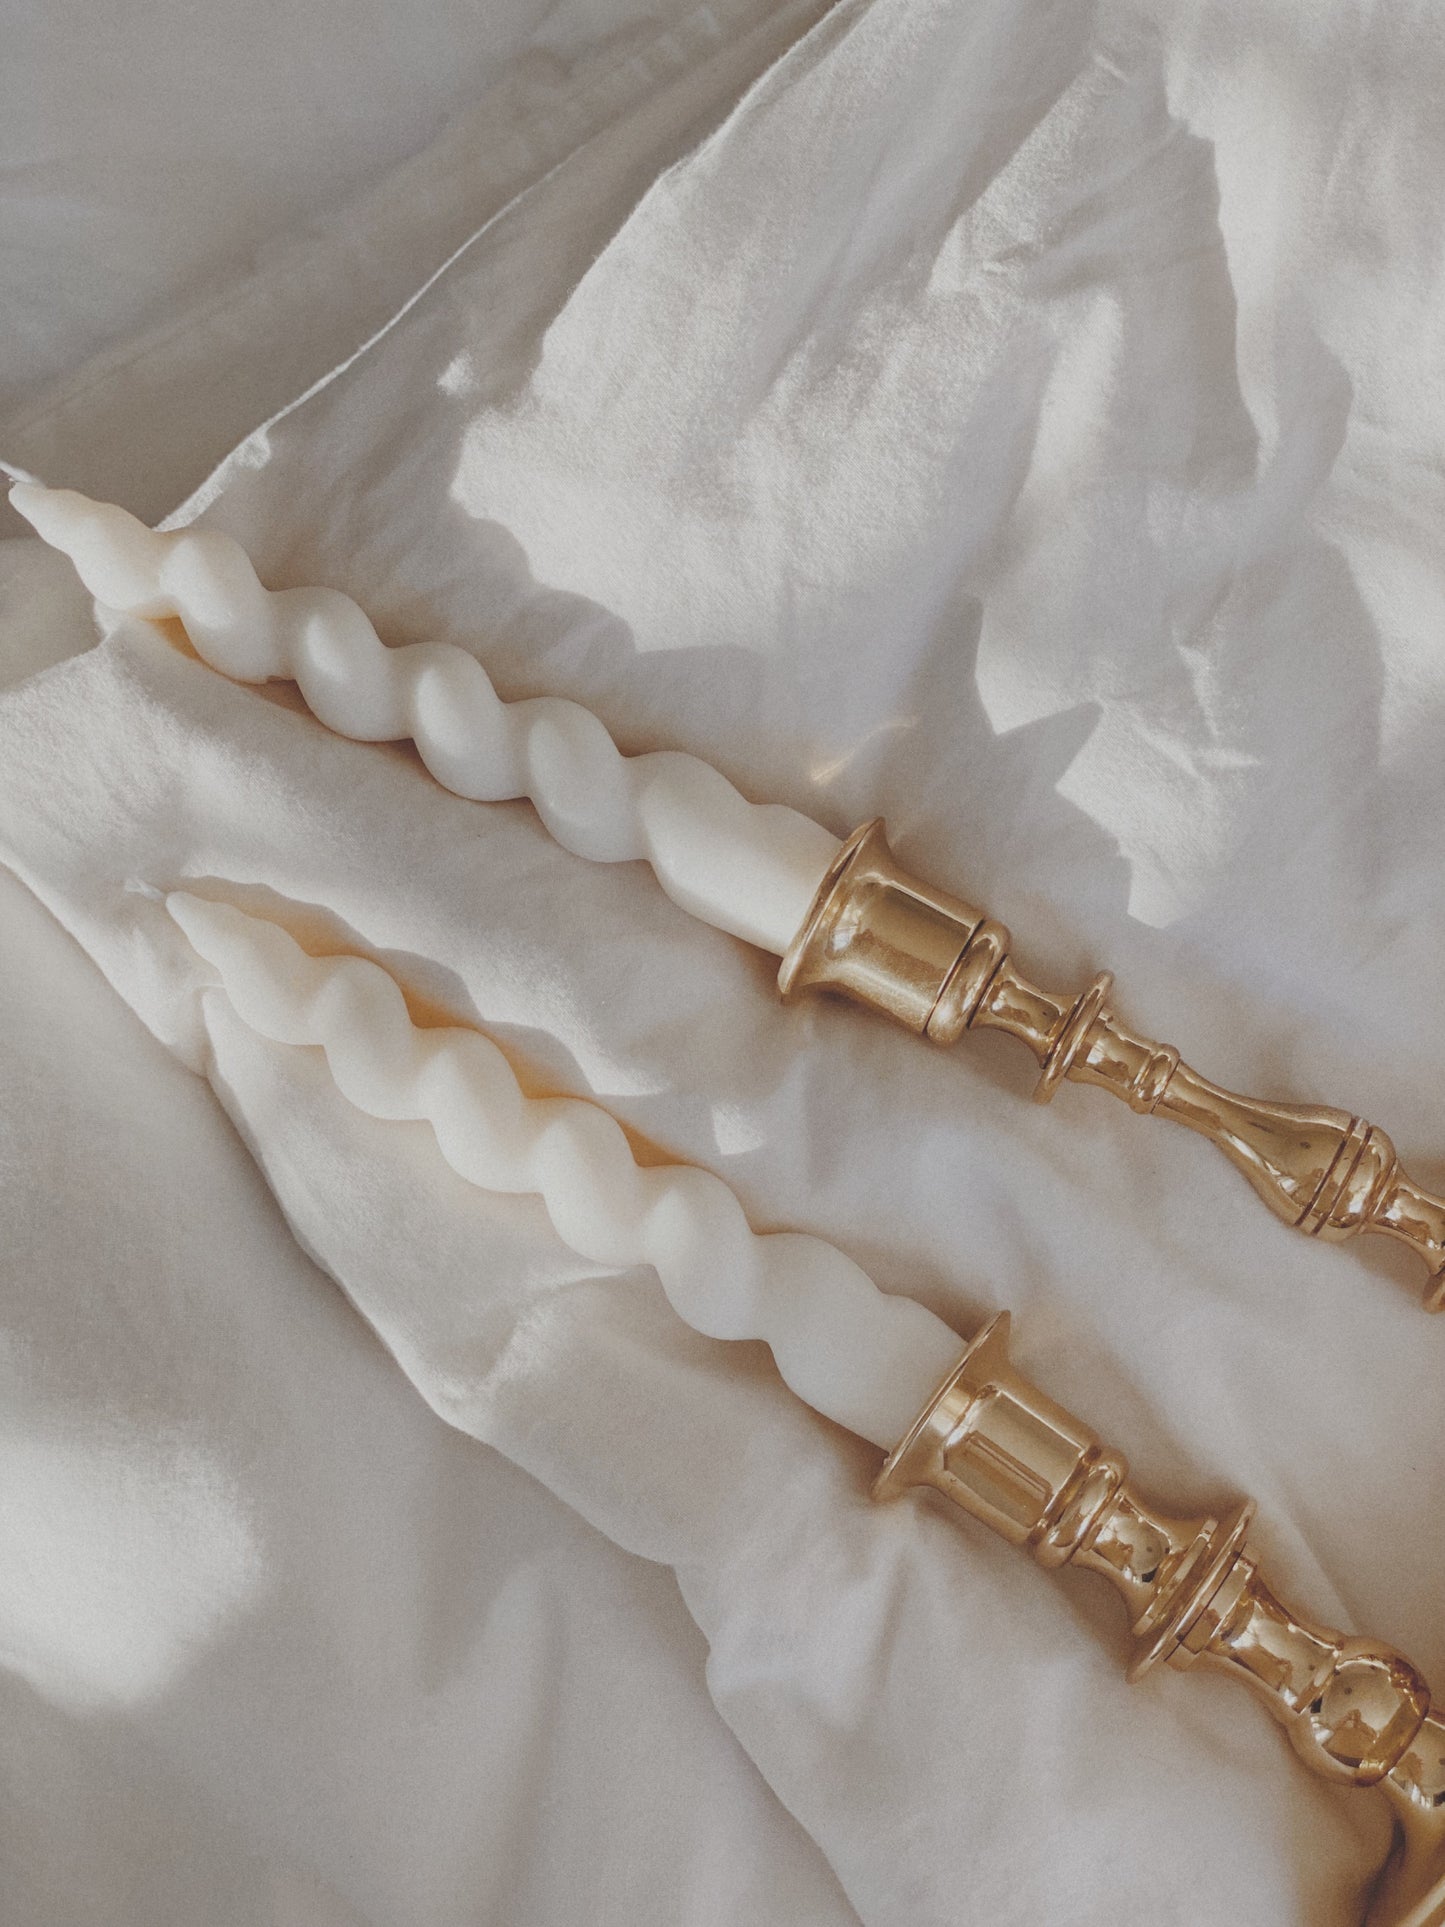 Spiral Taper Candles, Twisted Taper Soy Wax Candles